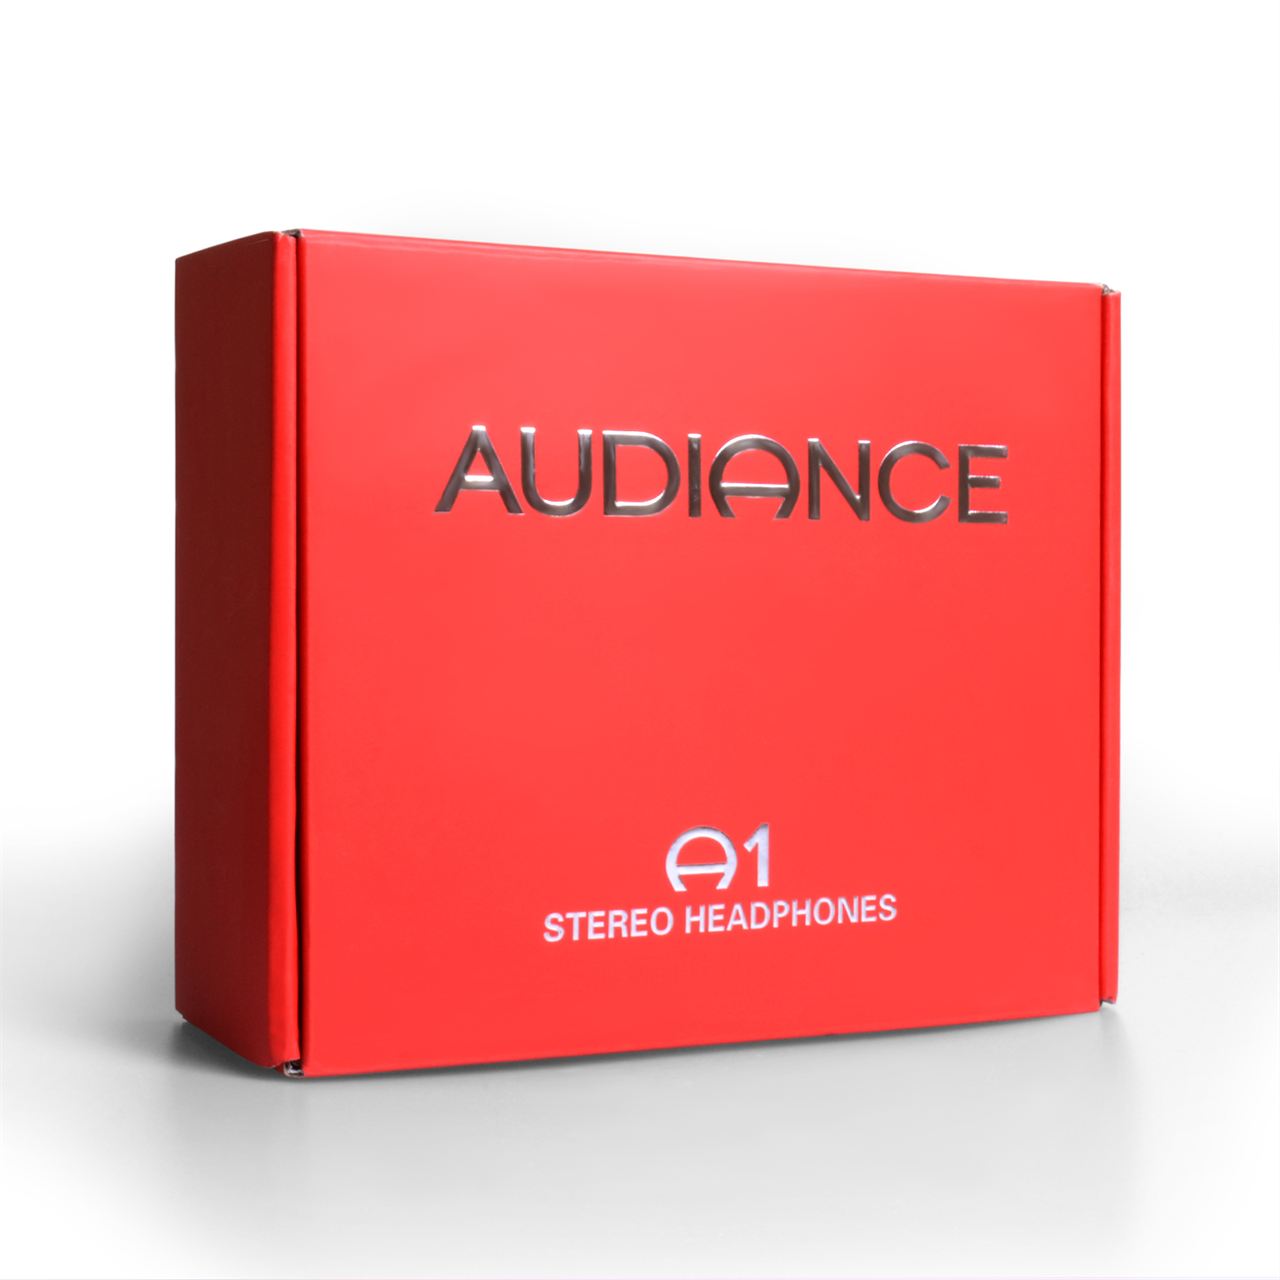 Audiance A1 Over Ear Headphones - Black/Red